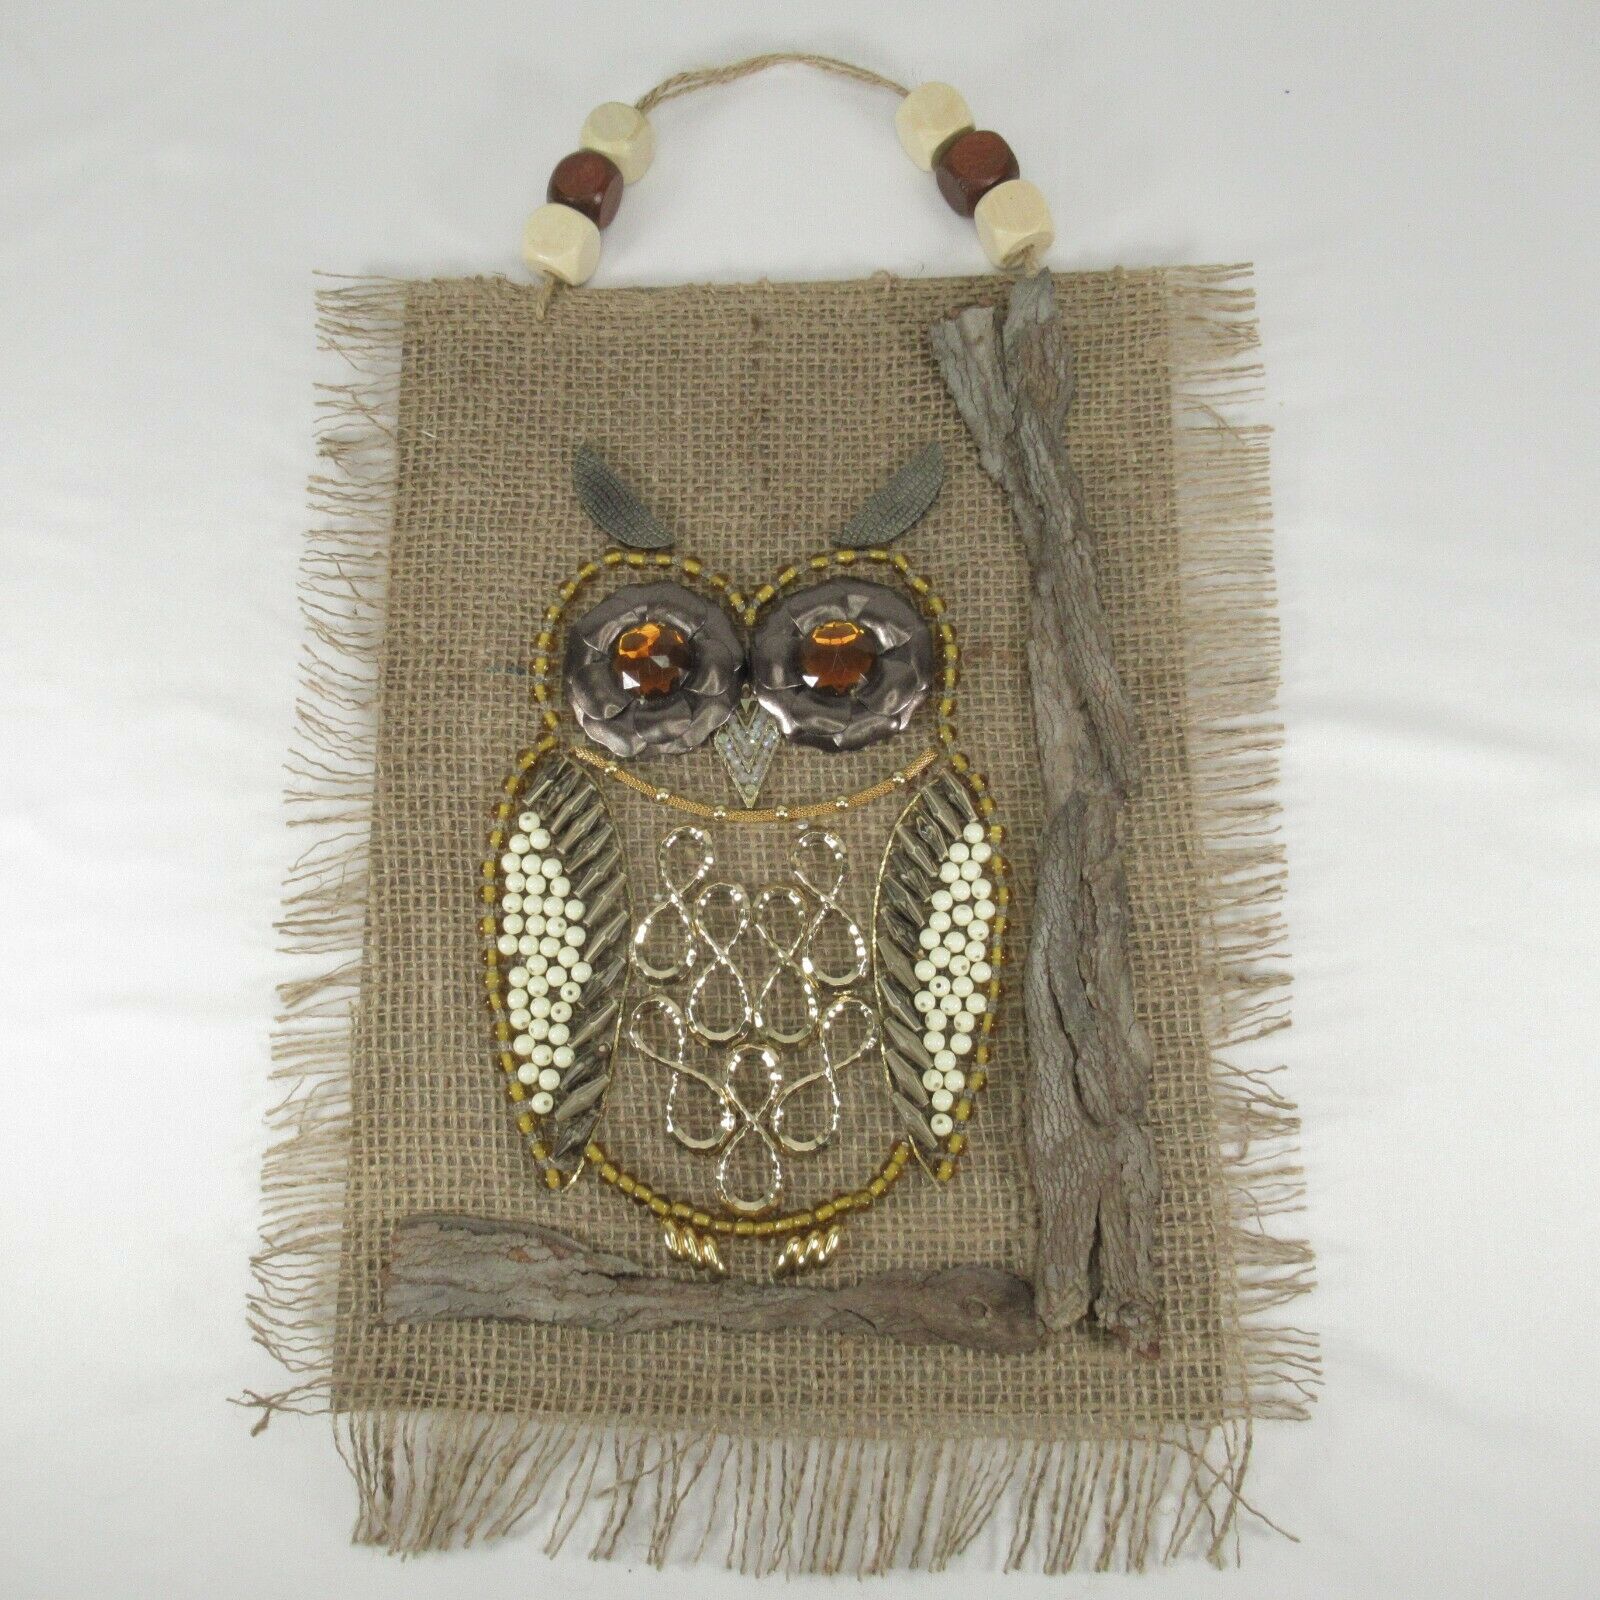 Jewelry Art Owl Handmade Collage Modern Vintage Pieces Burlap Wall Hanging 9x13